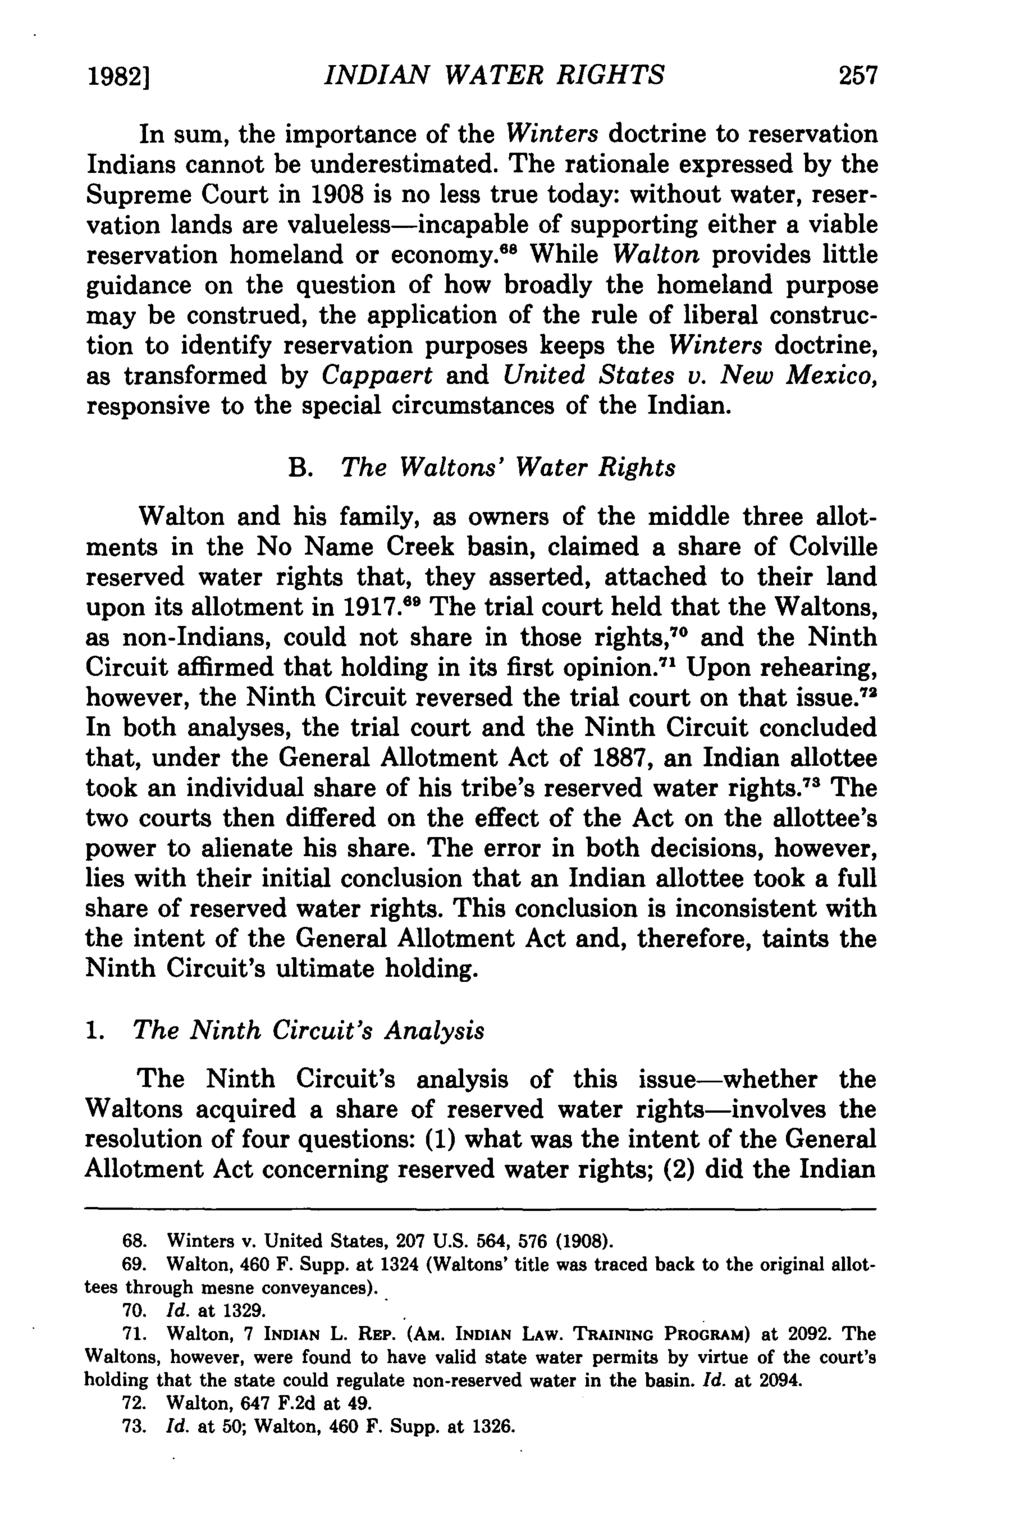 19821 Isham: Indian Water Rights INDIAN WATER RIGHTS In sum, the importance of the Winters doctrine to reservation Indians cannot be underestimated.